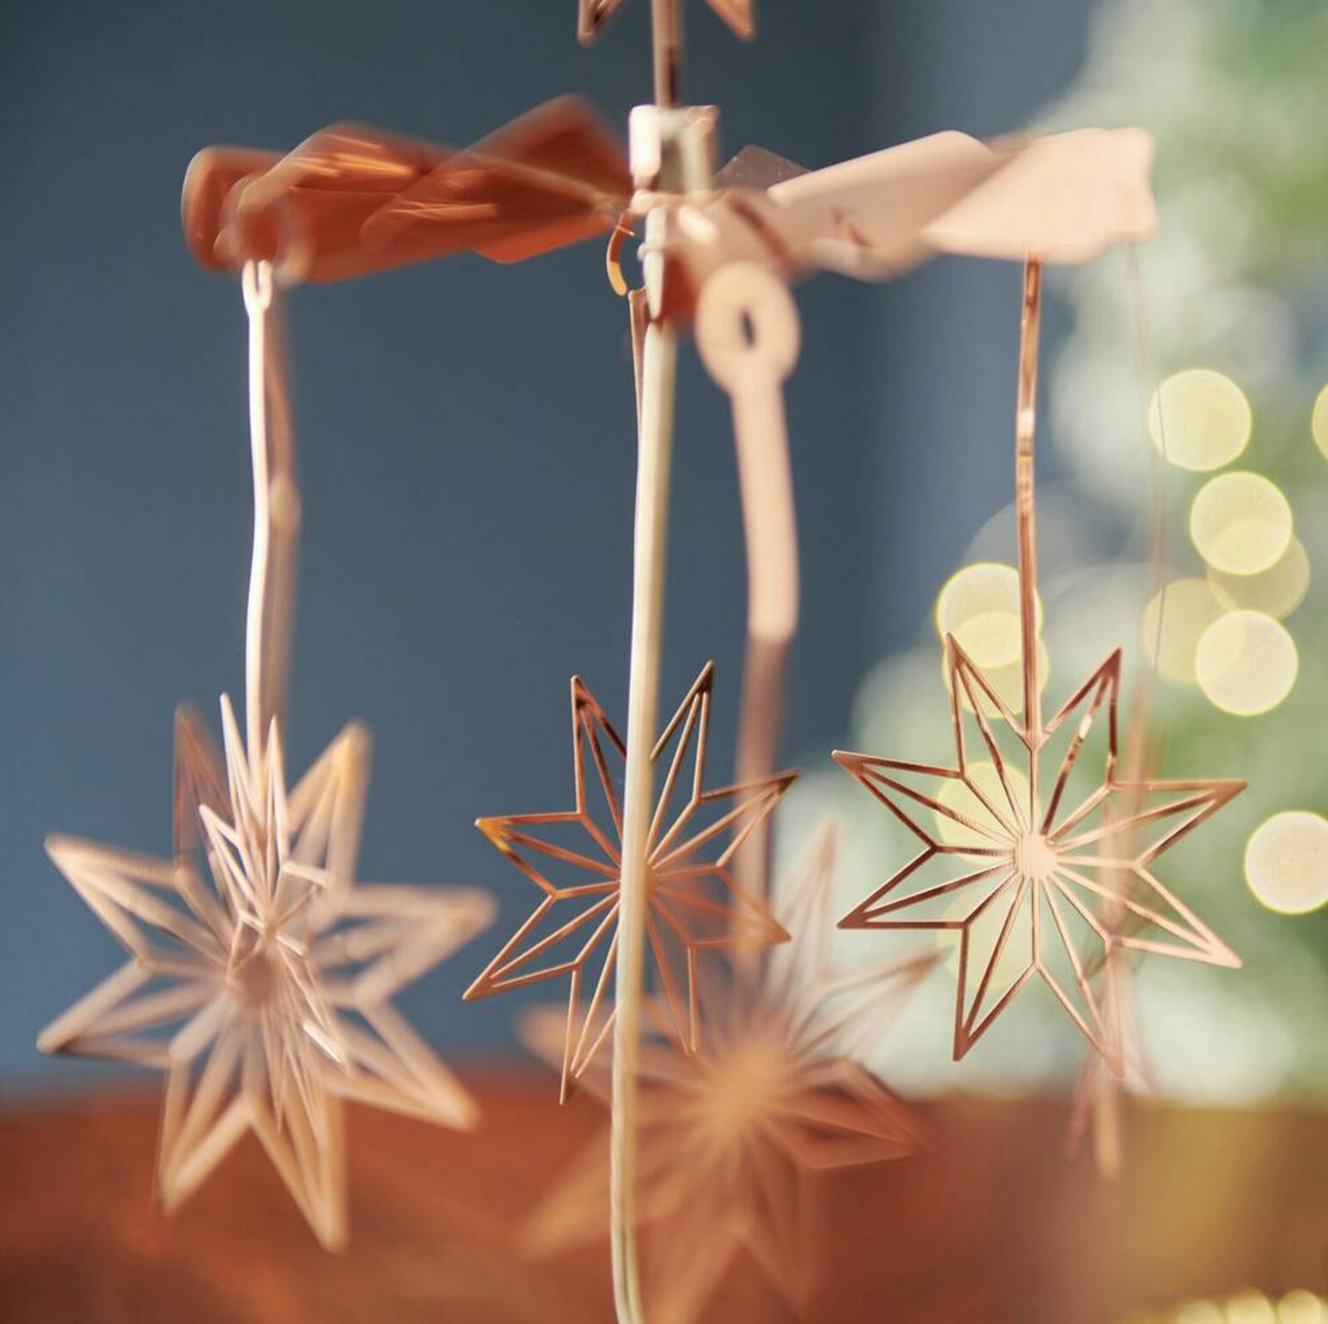 Metal Copper star Candle Spinner